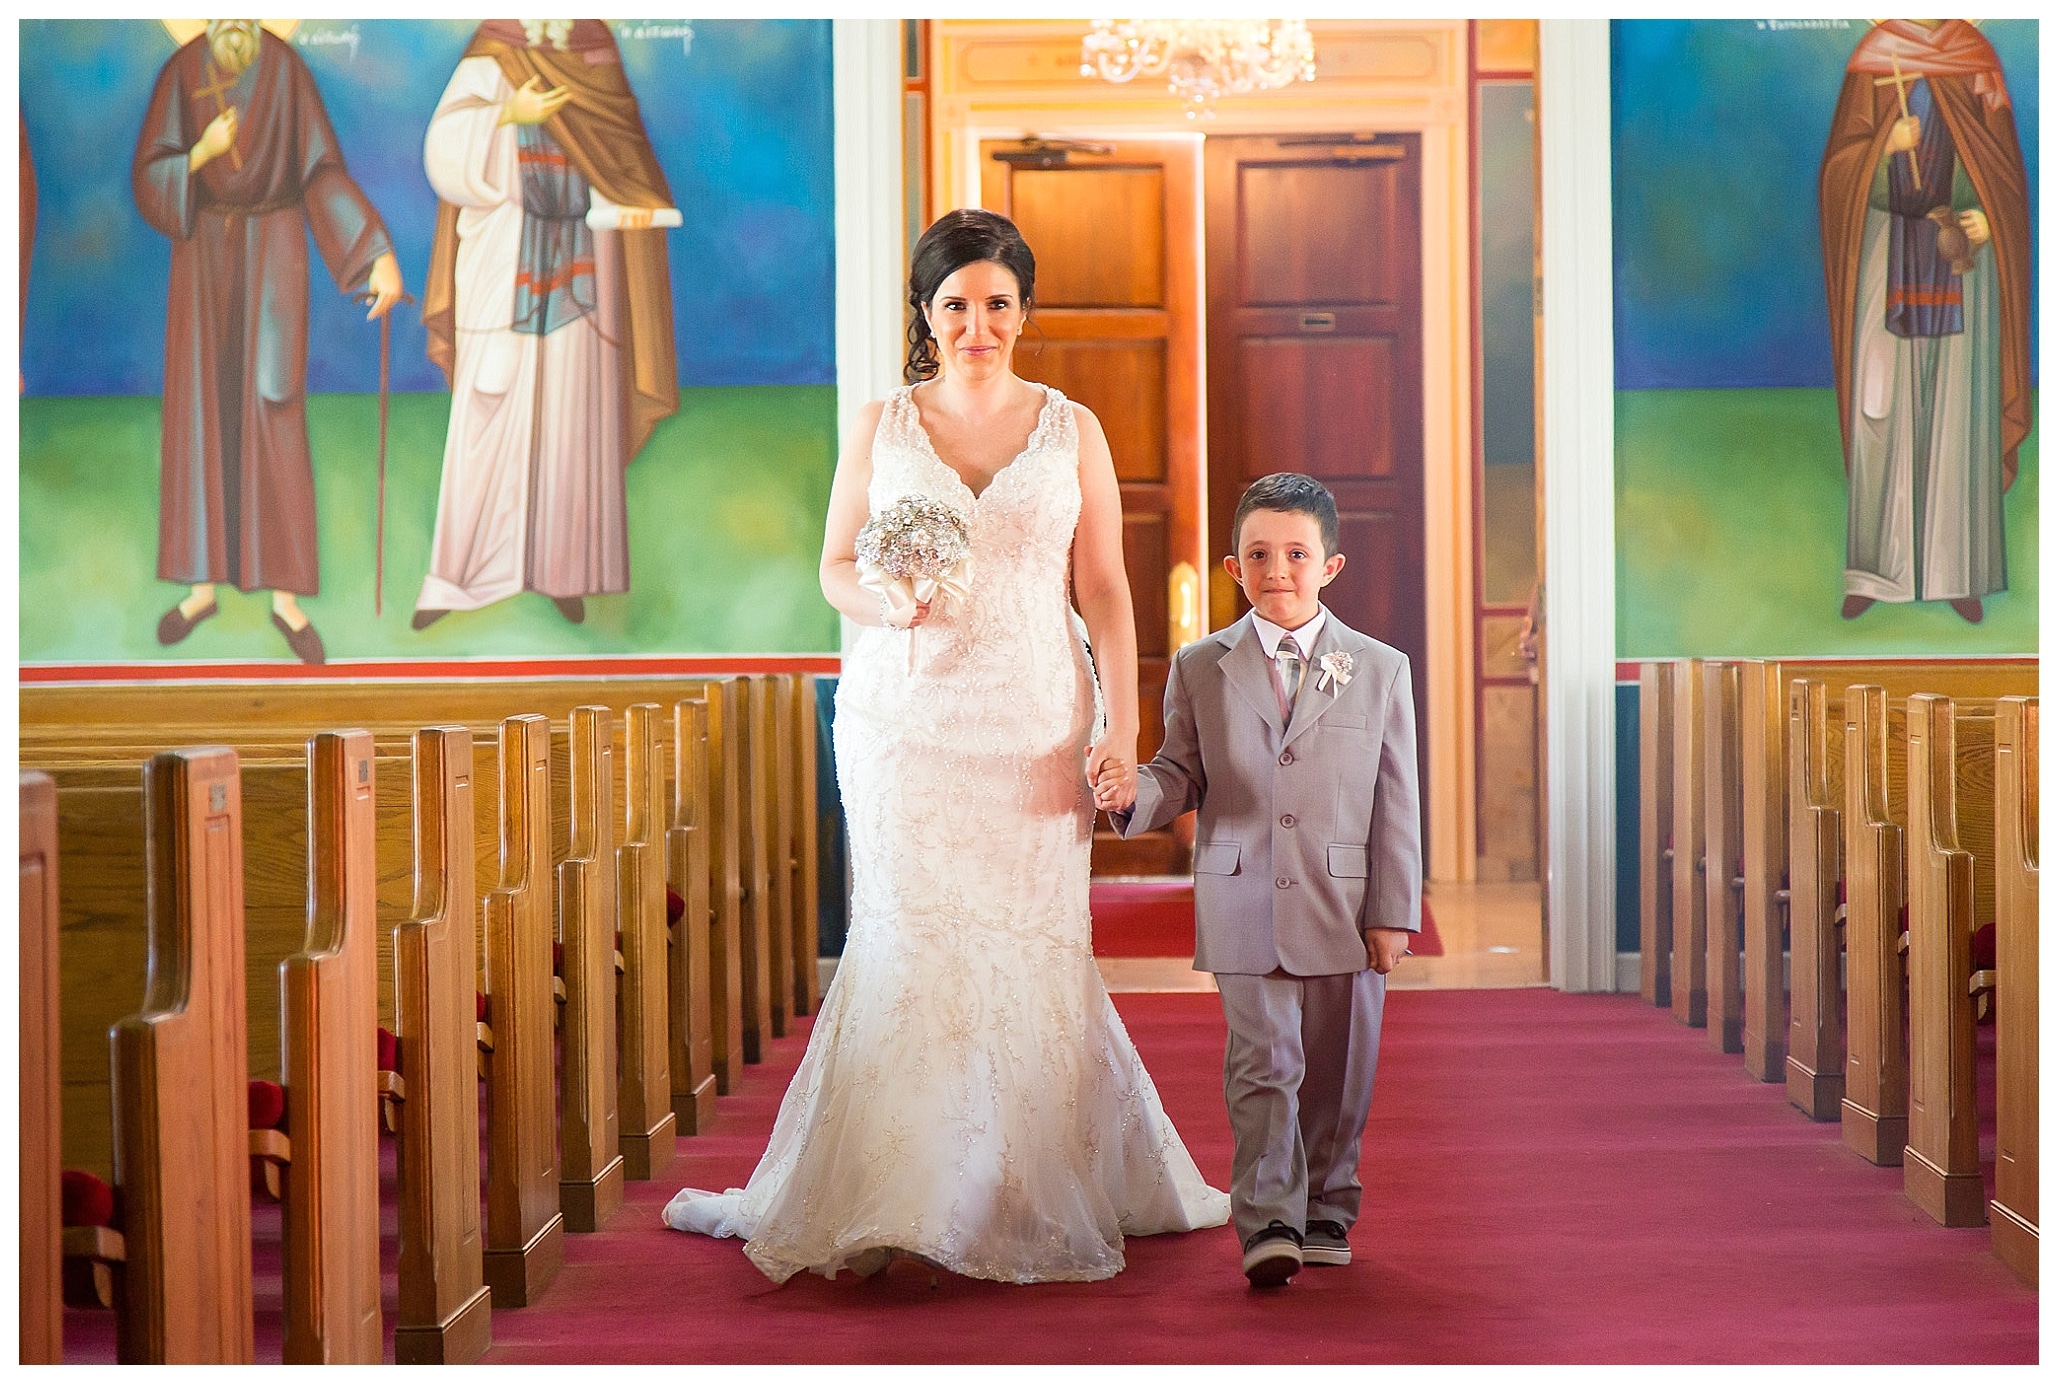 Brike walking down the isle with her son